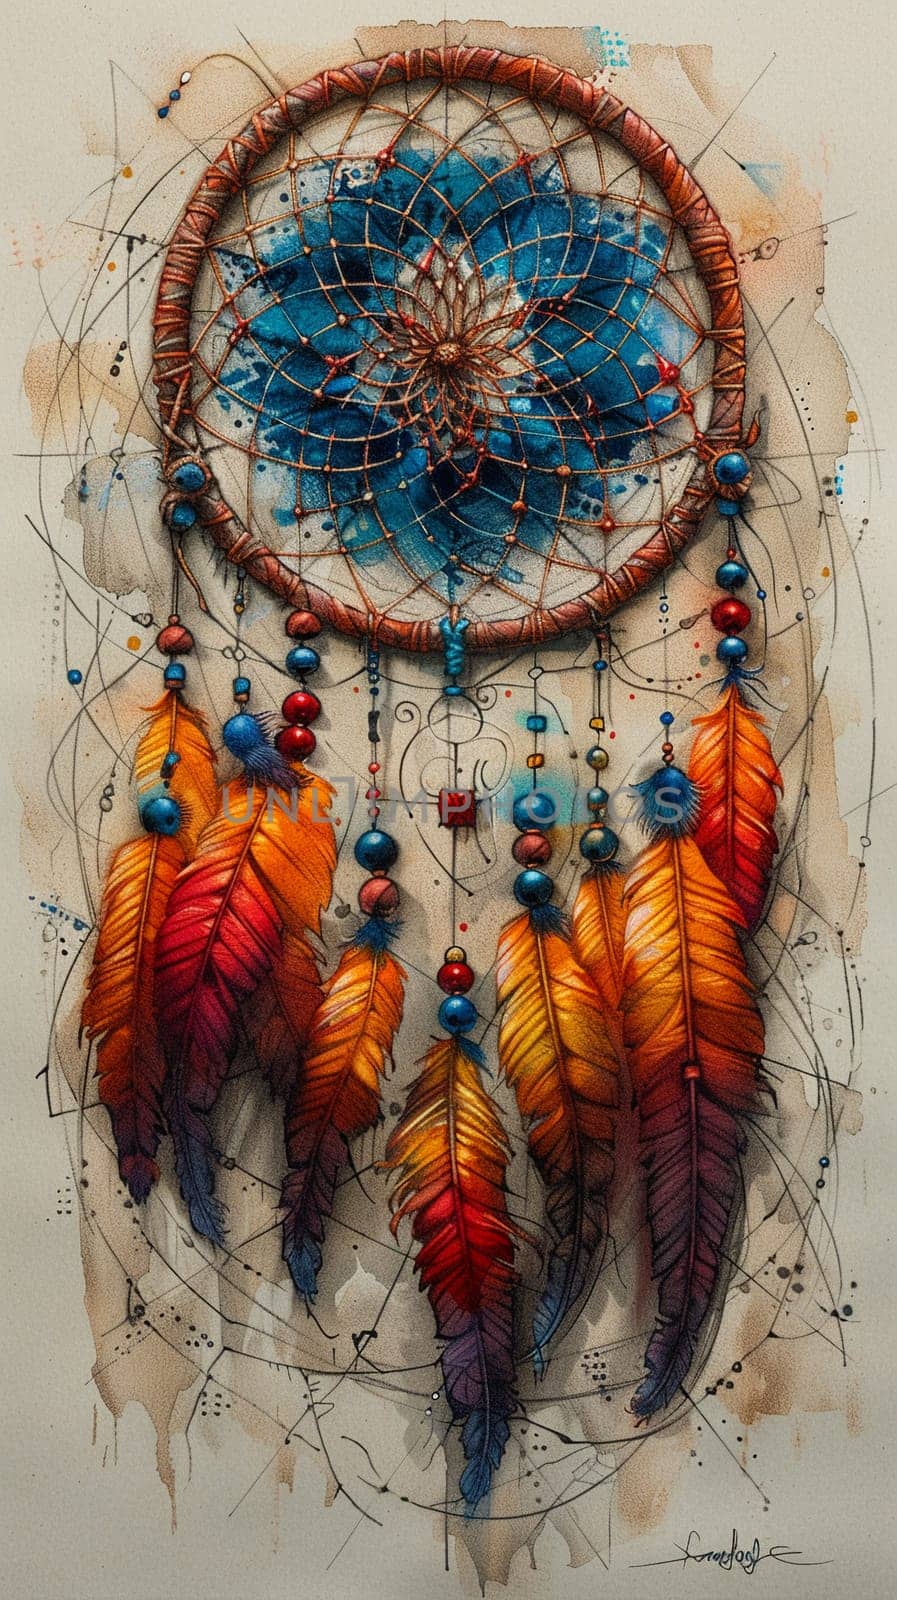 Fantasy concept sketch of dreamcatcher netting bad dreams for World Sleep Day.